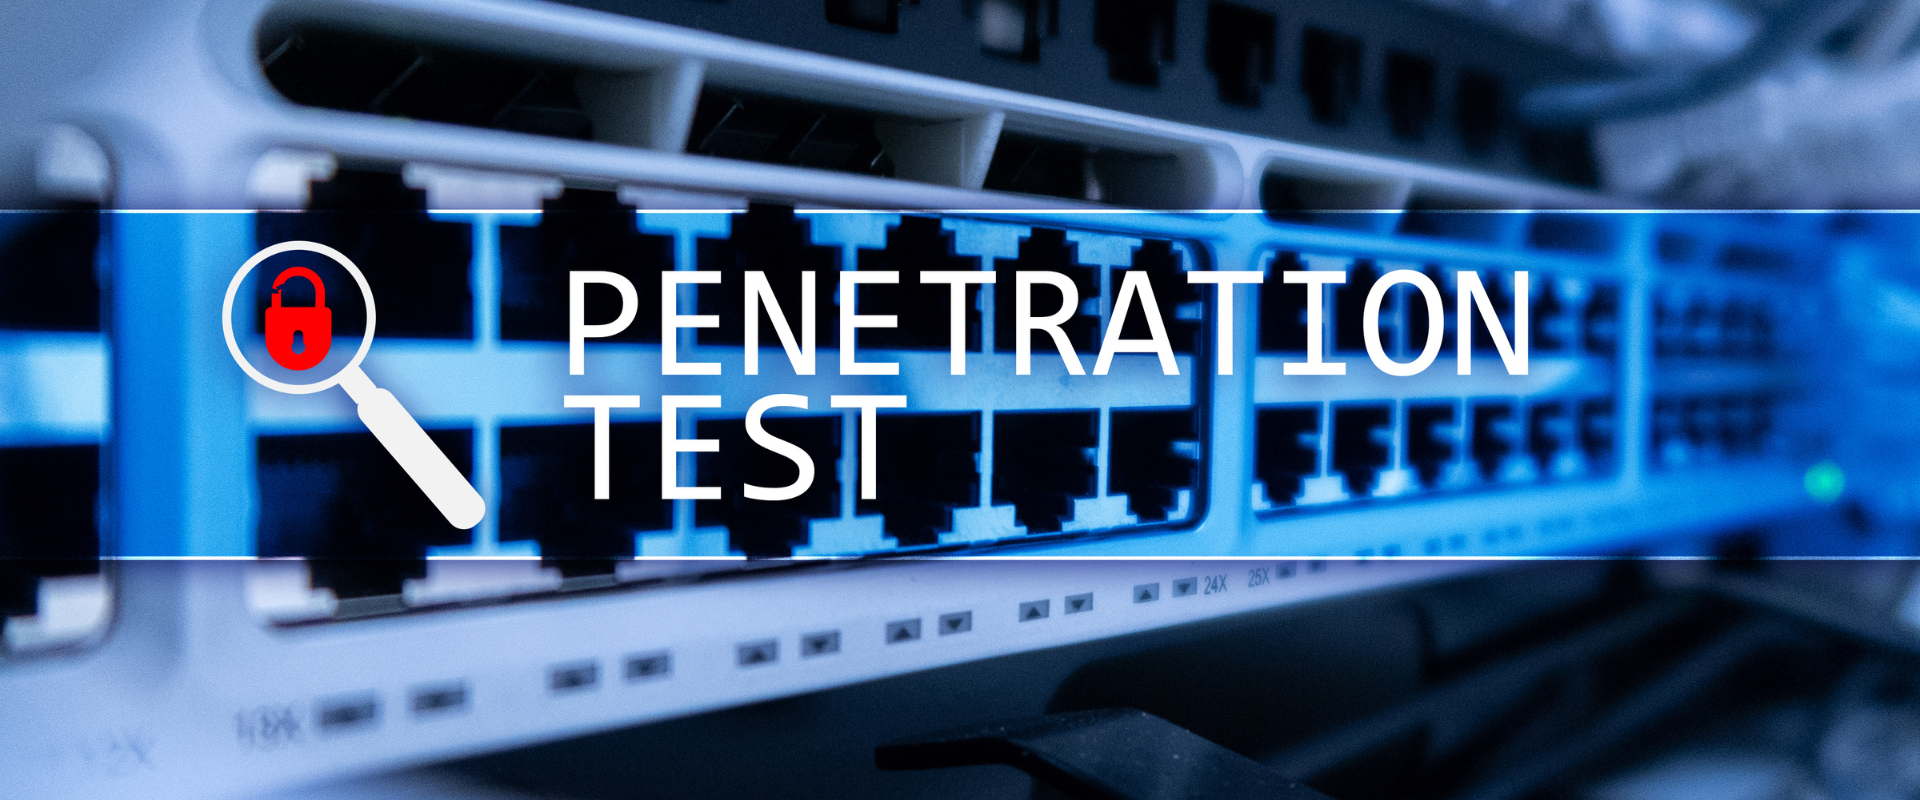 Why Penetration Testing is Crucial for Your Business Security